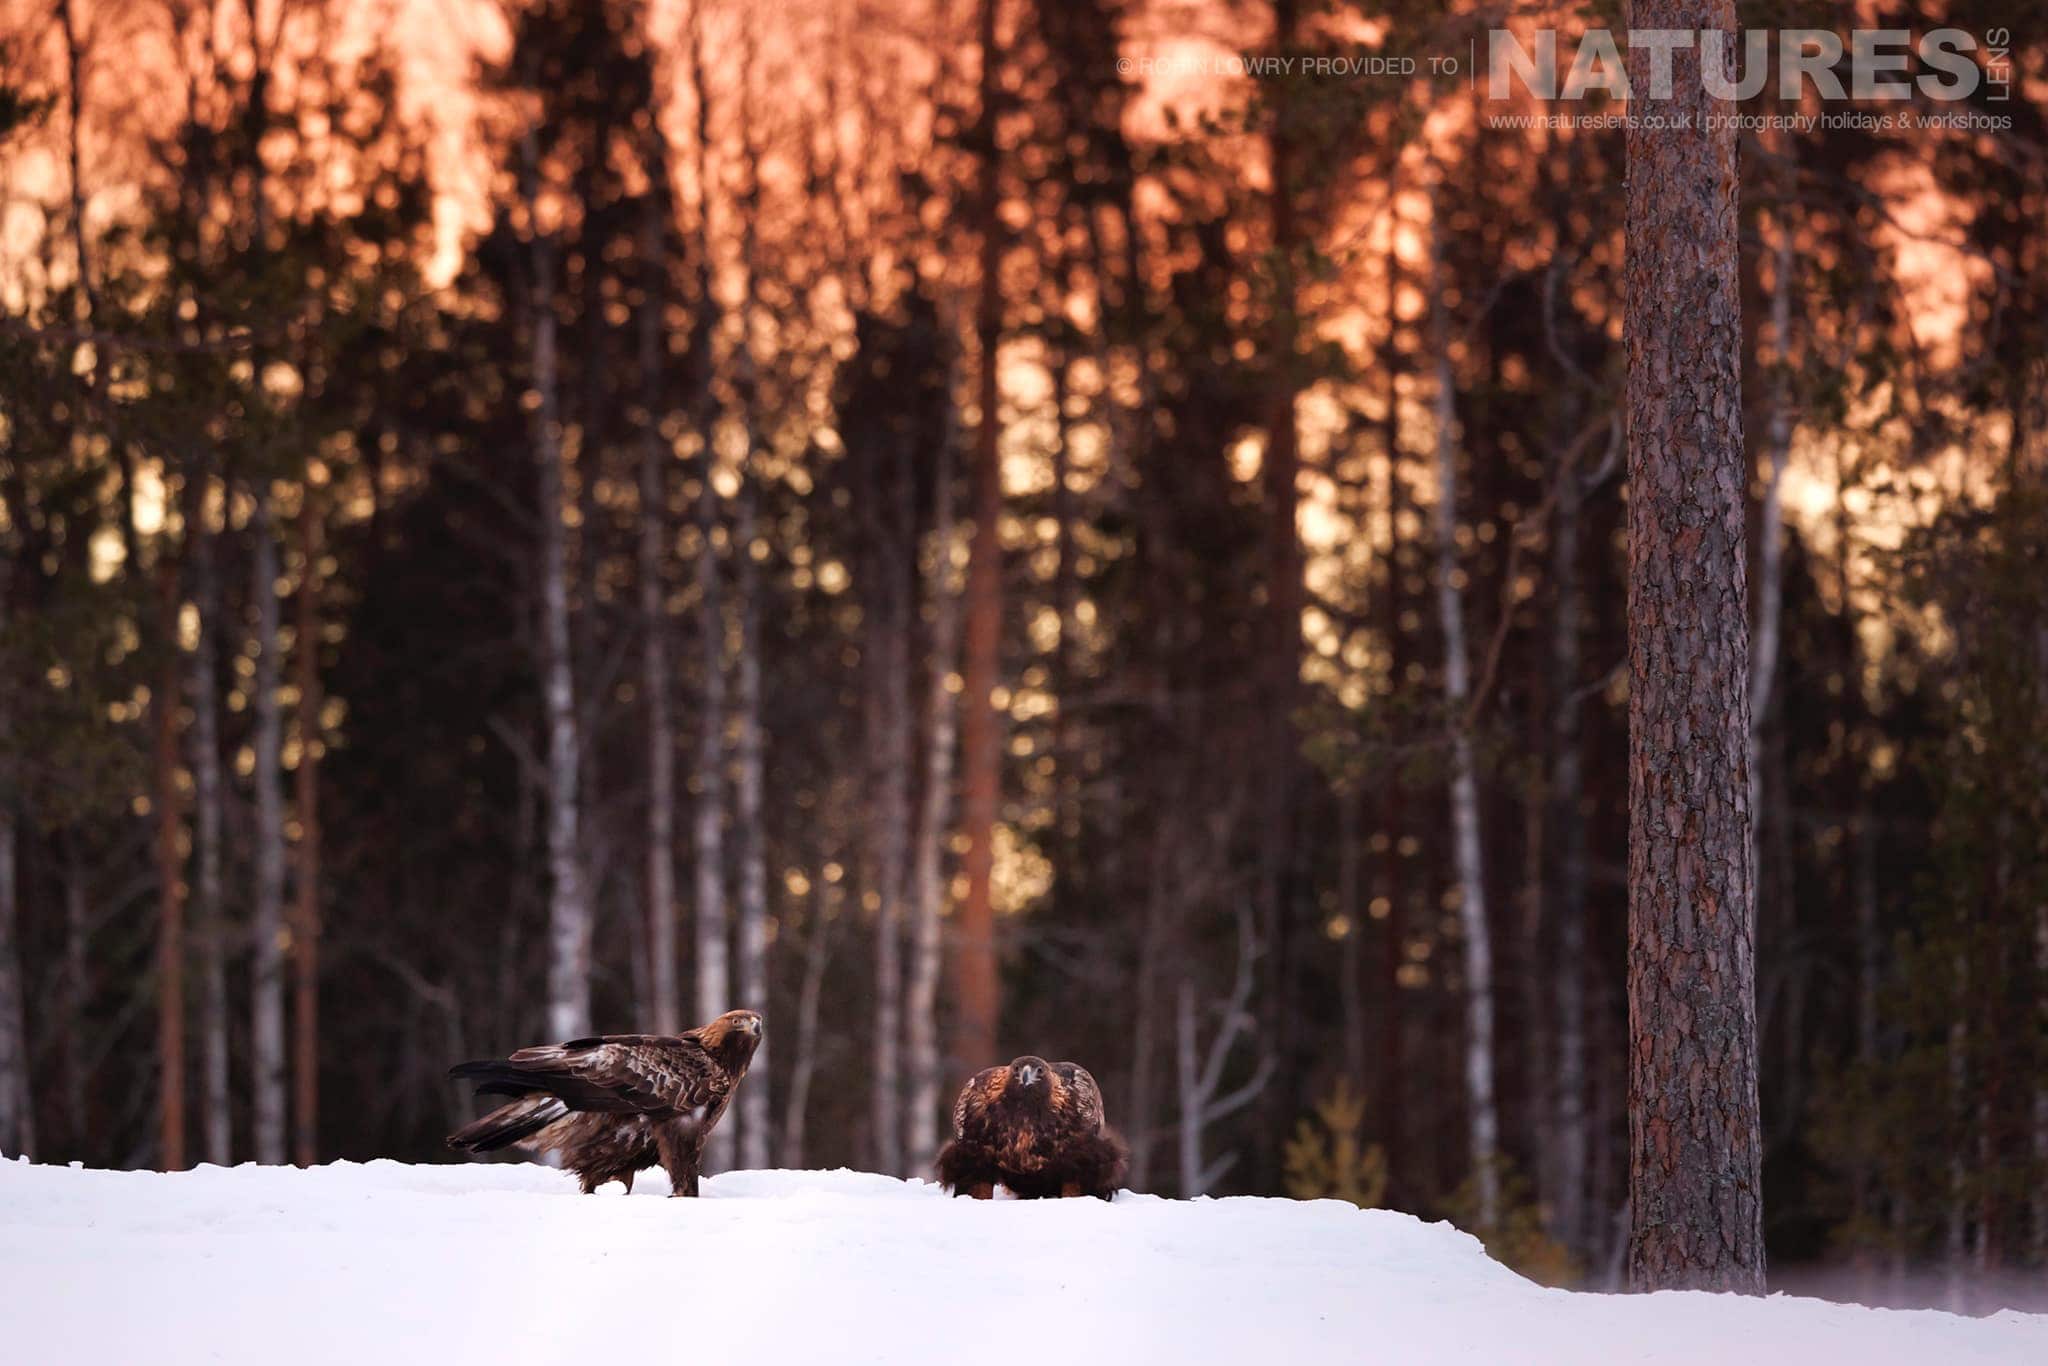 The Pair Of Golden Eagles In Soft Golden Light Photographed During A Natureslens Photography Holiday To Photograph Northern Sweden'S Eagles In Winter